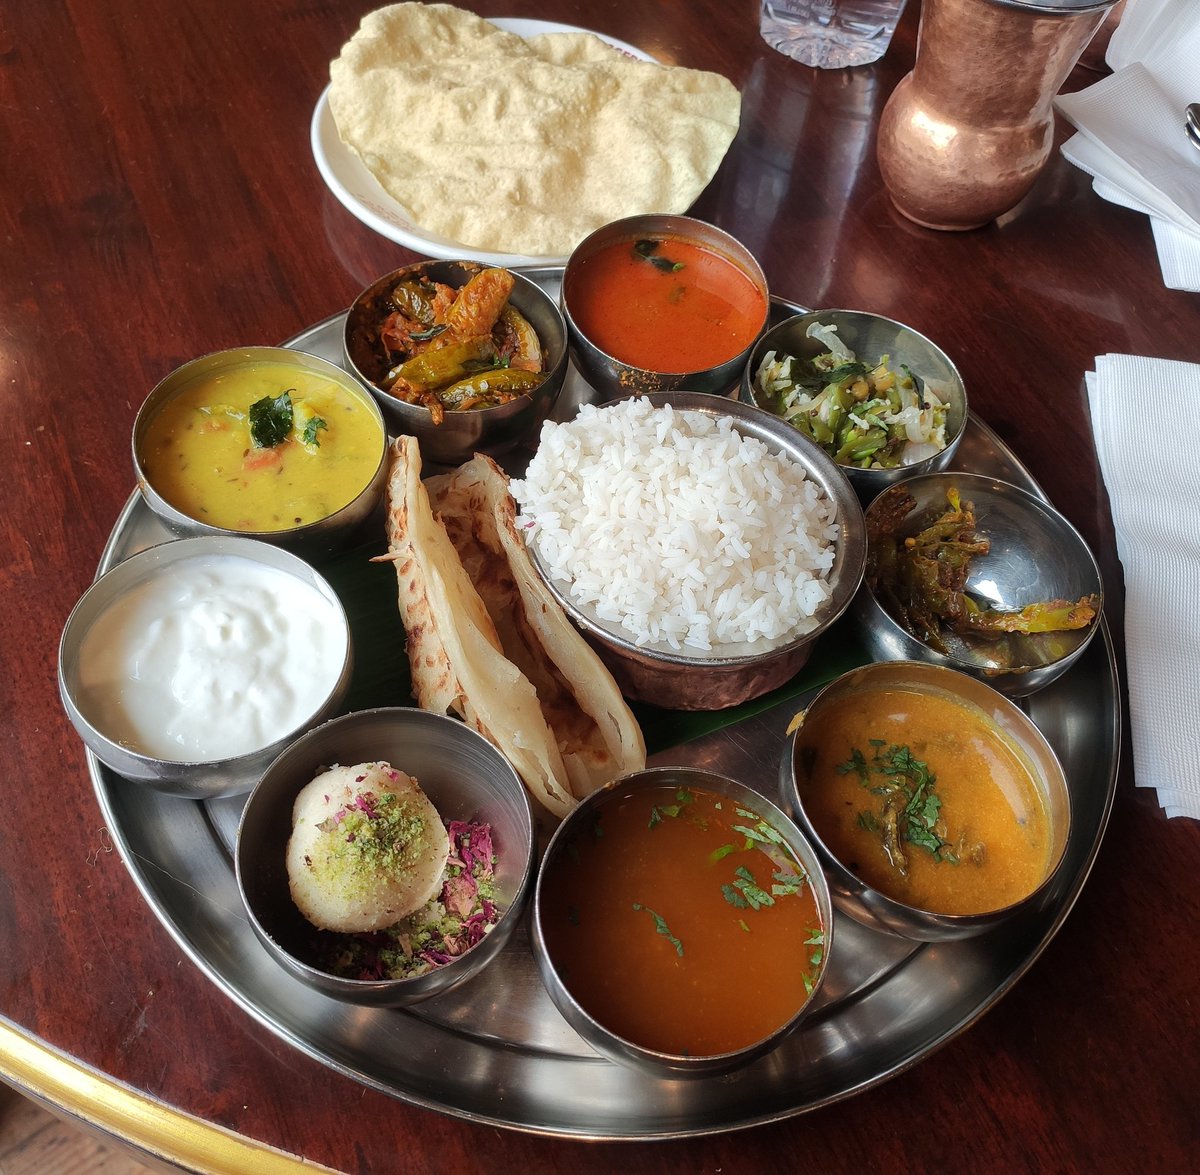 Today's lunch: South Indian Thali at Juggernaut, Kailash Colony
#FridayLunch